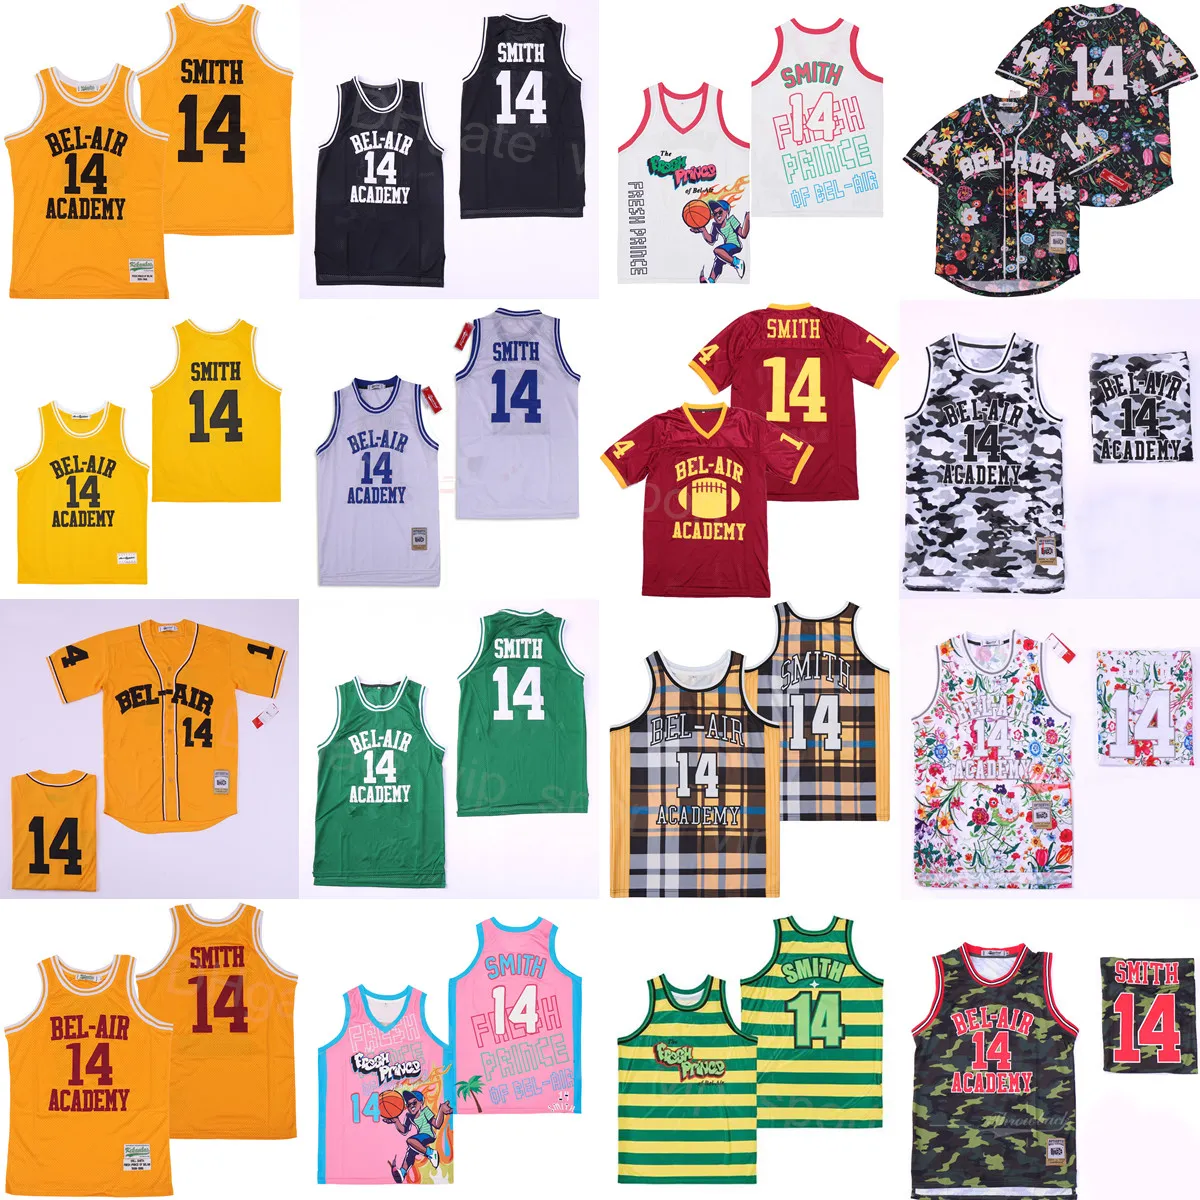 Movie Film Basketball The Fresh Prince Jersey 14 Will Smith Jeff OF BEL-AIR GRAFFITI ANNIVERSARY BELAIR Black White Yellow Red Green Pink Color All Stitching High